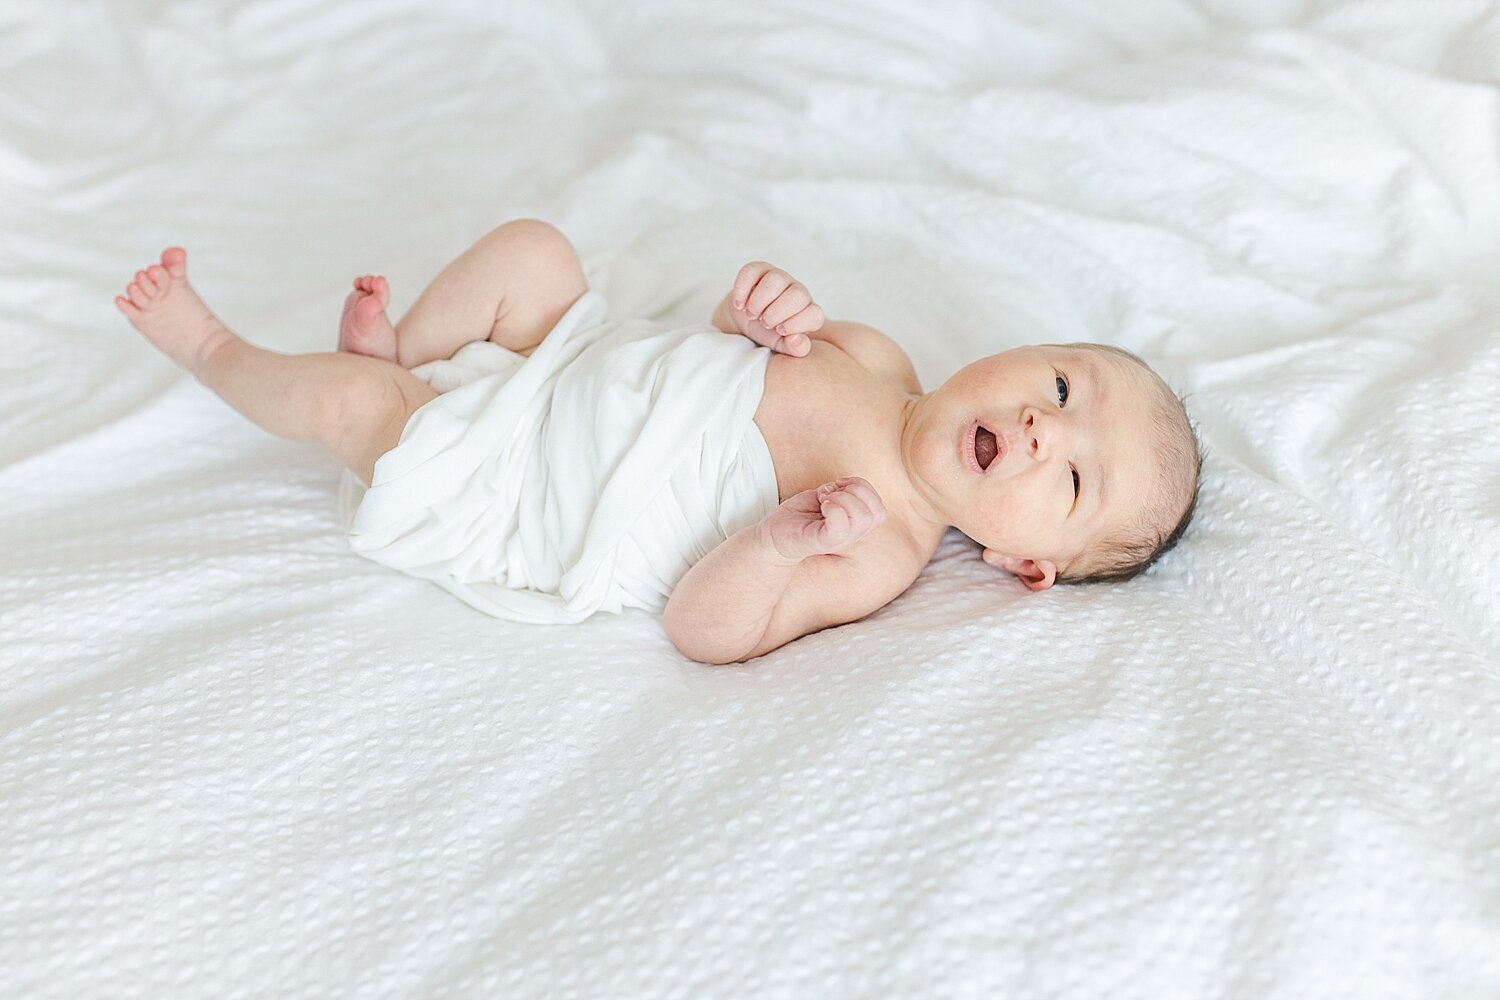 Baby girl swaddled in a white blanket stretching out her legs. Photo by Kristin Wood Photography.